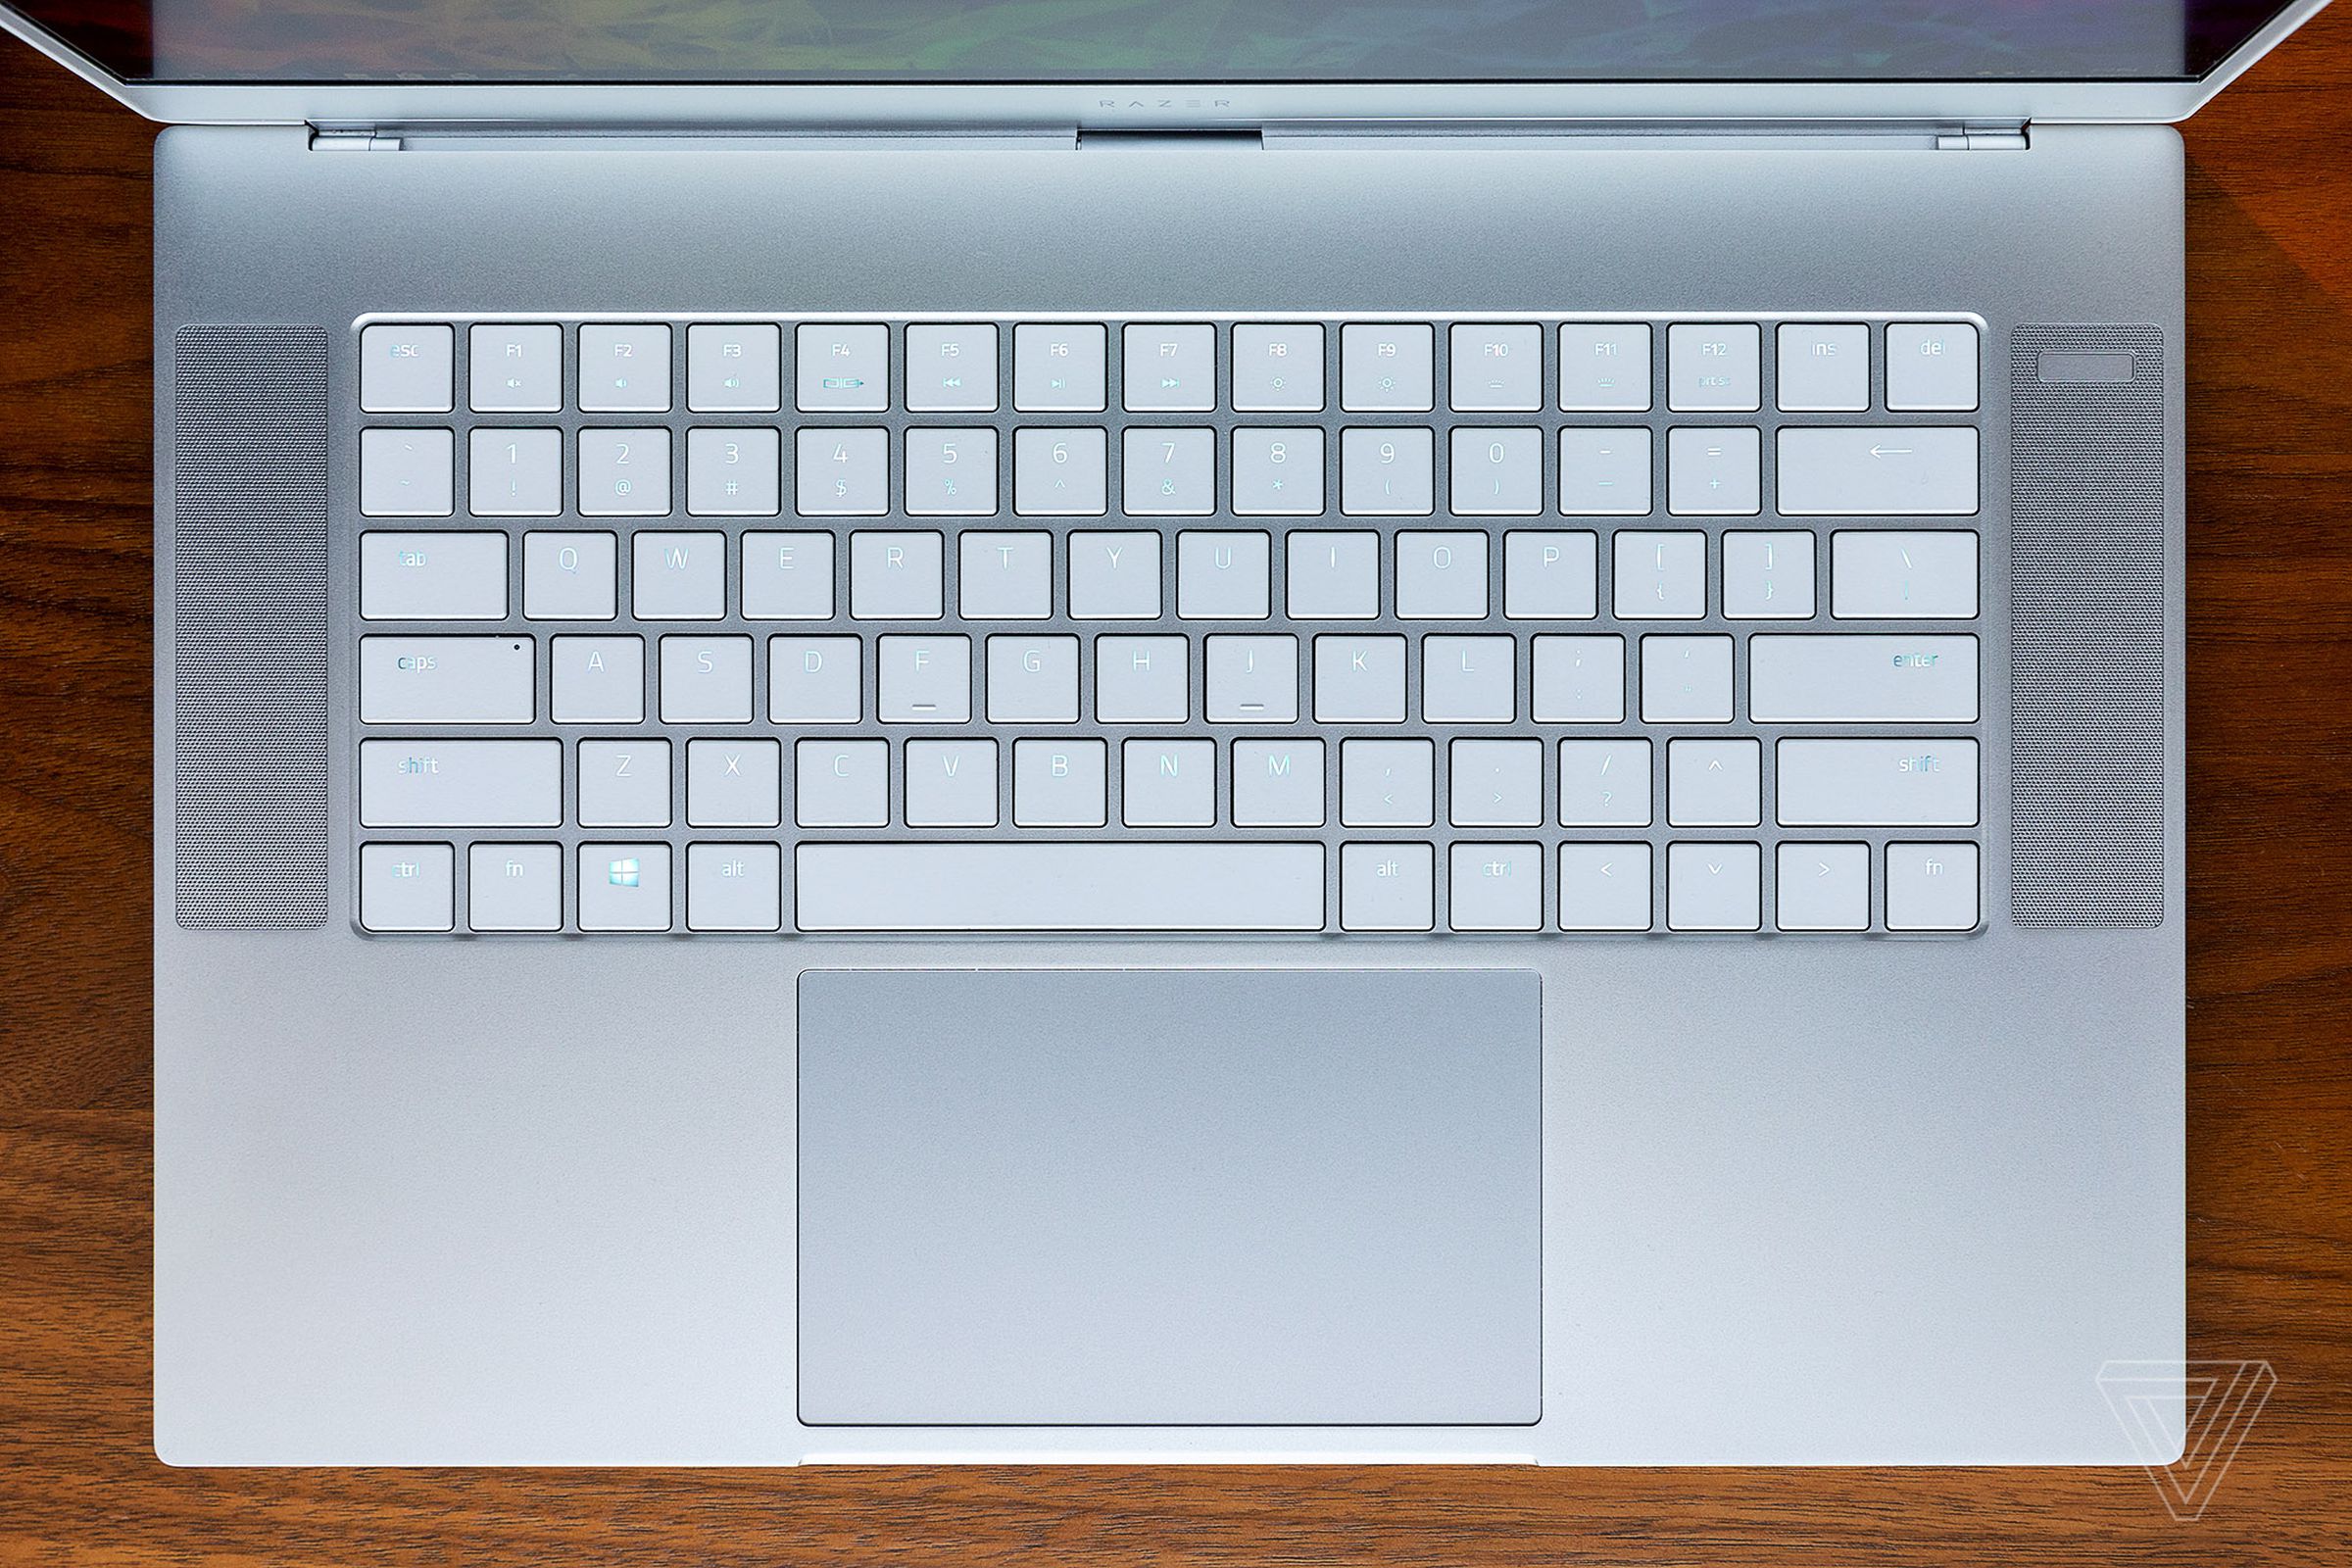 The Blade 15’s keyboard has layout quirks and uncomfortably shallow travel.